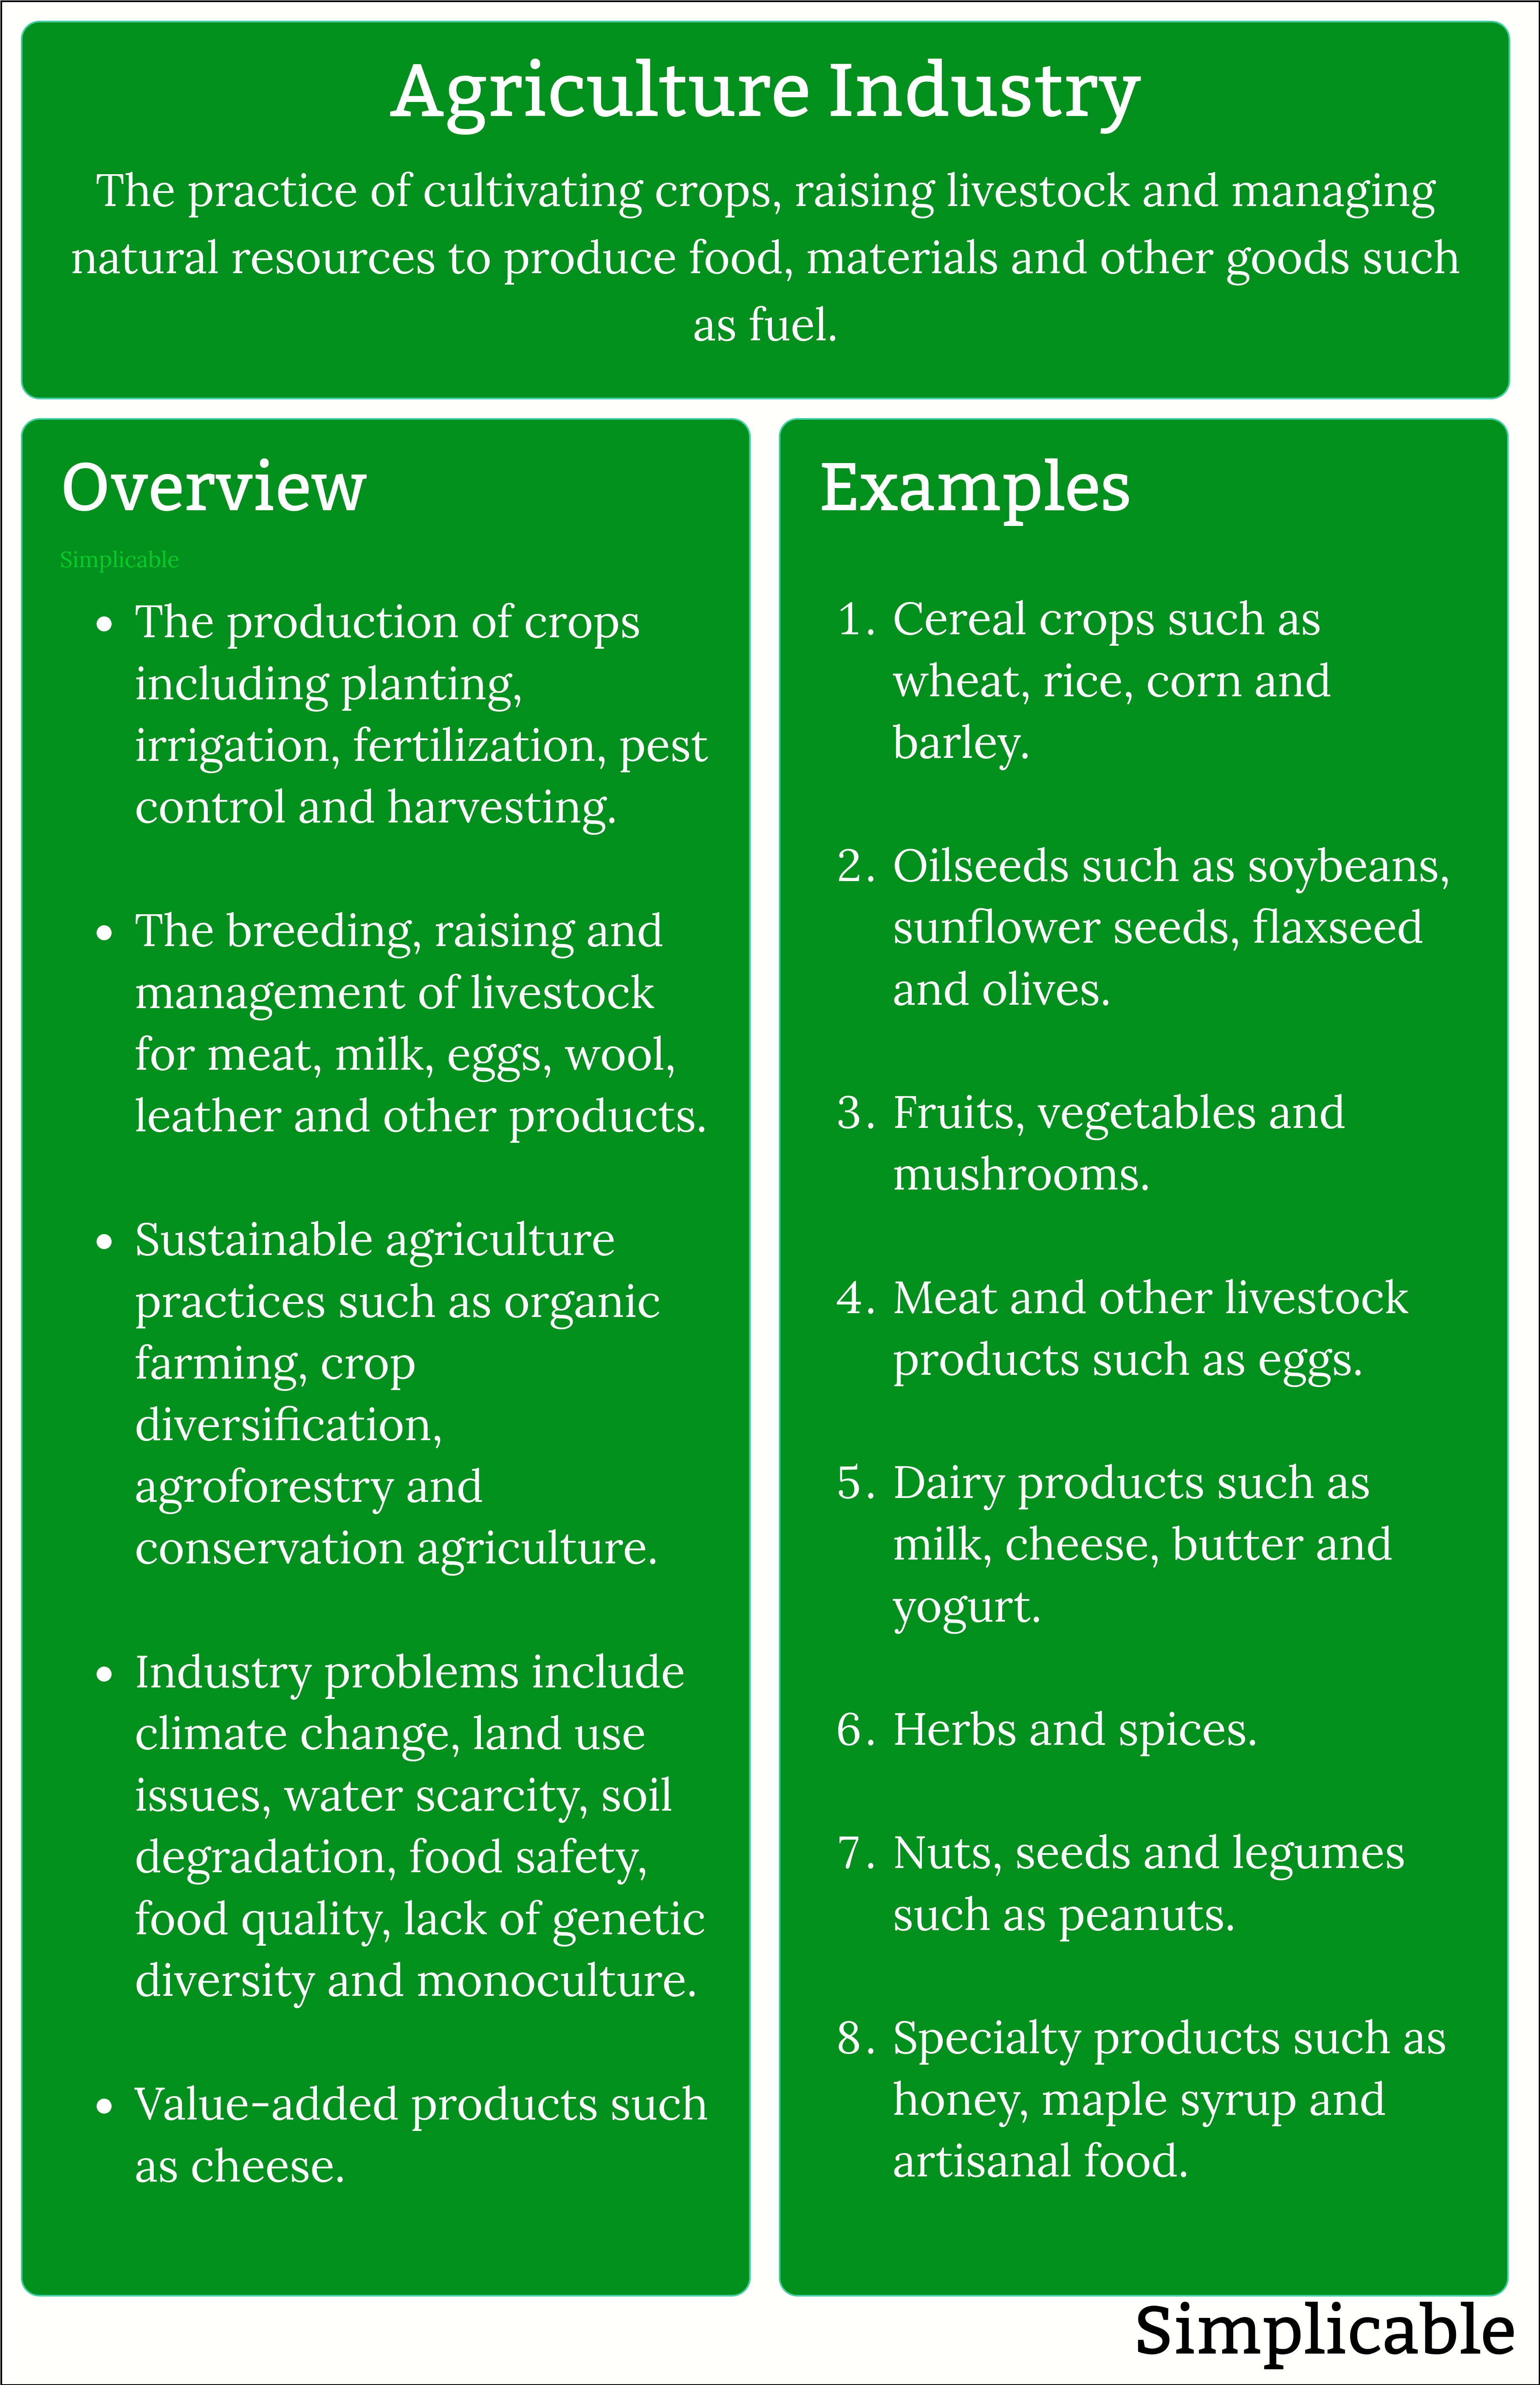 agriculture industry overview and examples